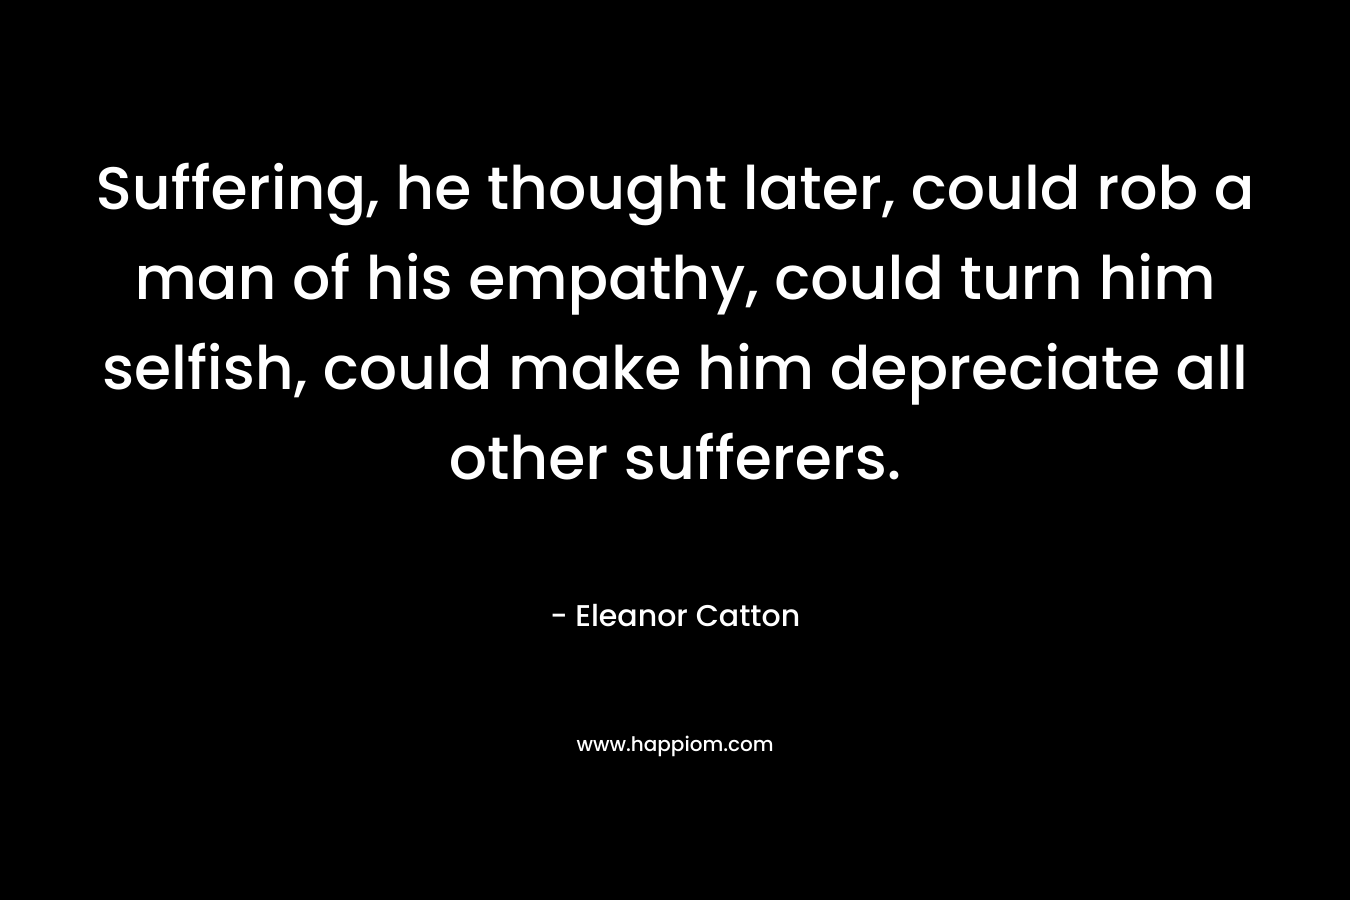 Suffering, he thought later, could rob a man of his empathy, could turn him selfish, could make him depreciate all other sufferers. – Eleanor Catton